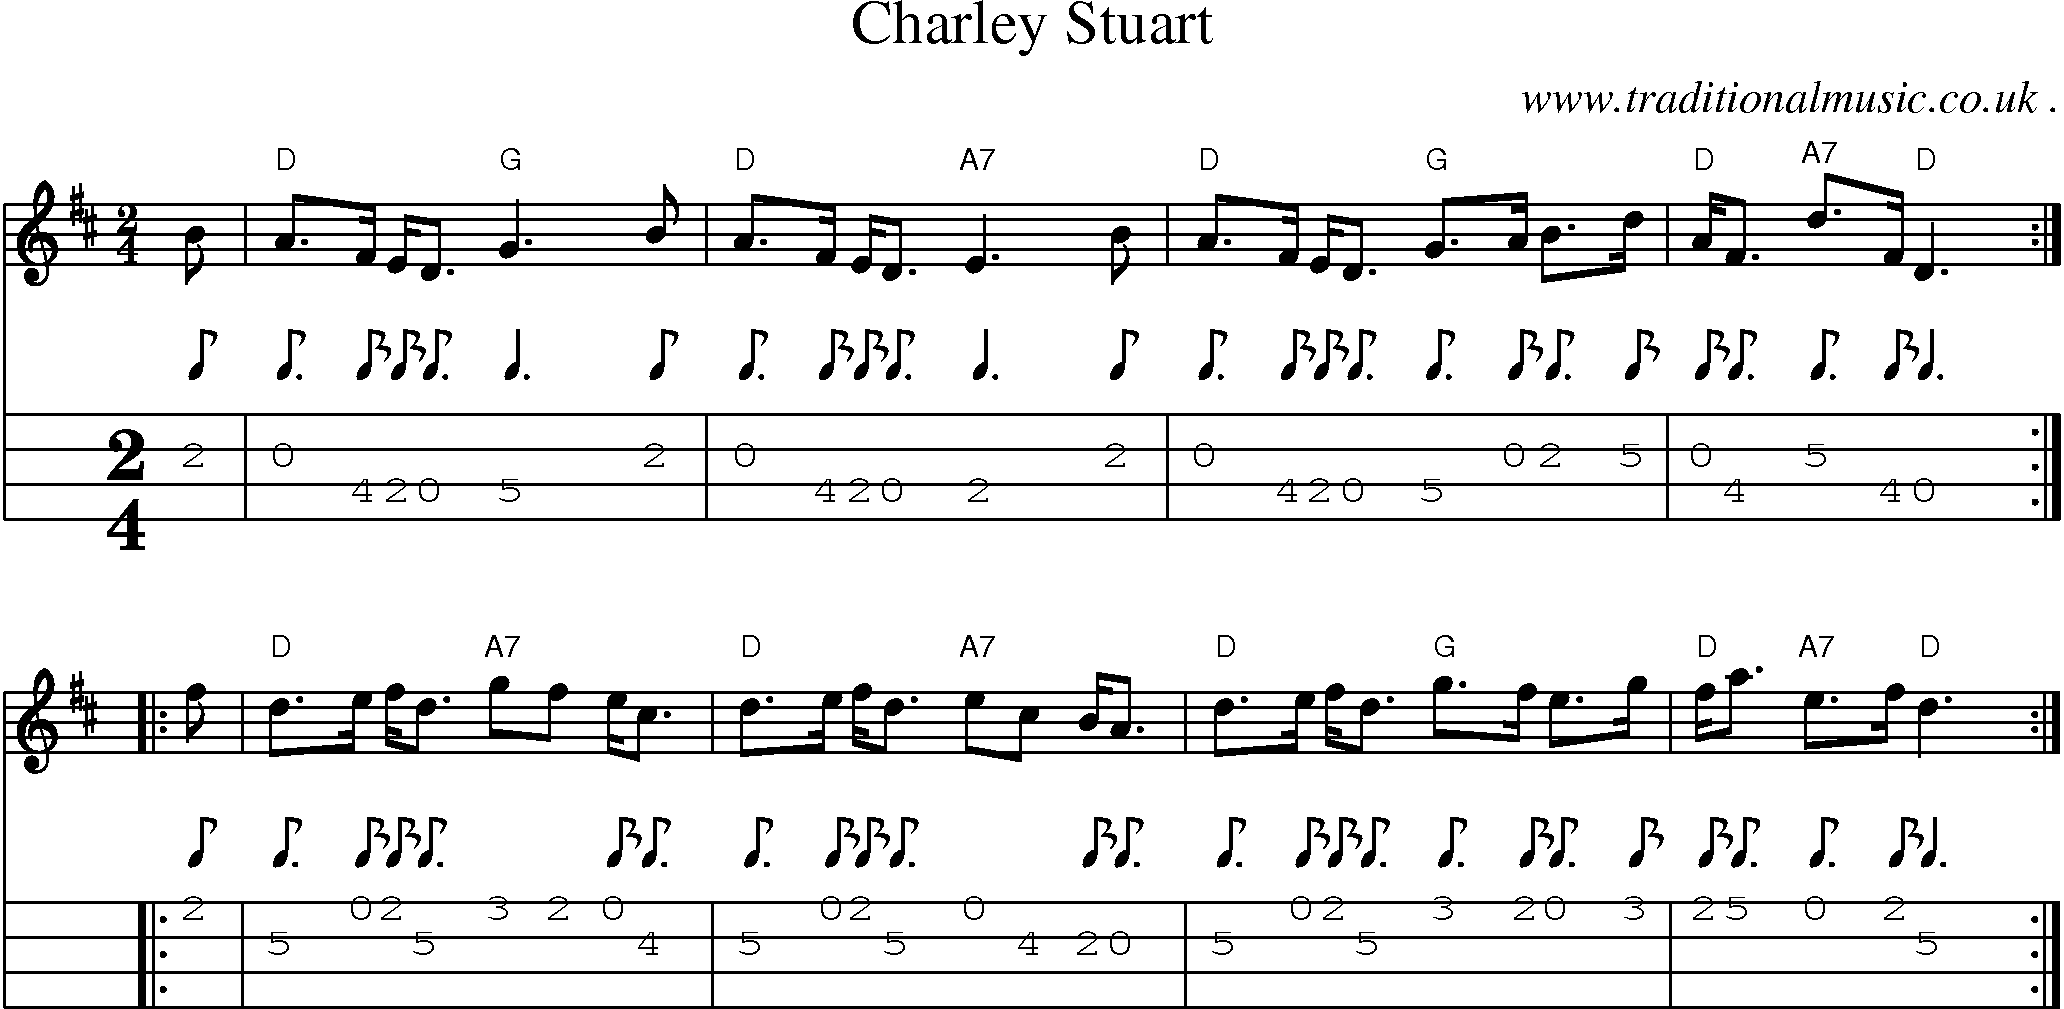 Sheet-music  score, Chords and Mandolin Tabs for Charley Stuart